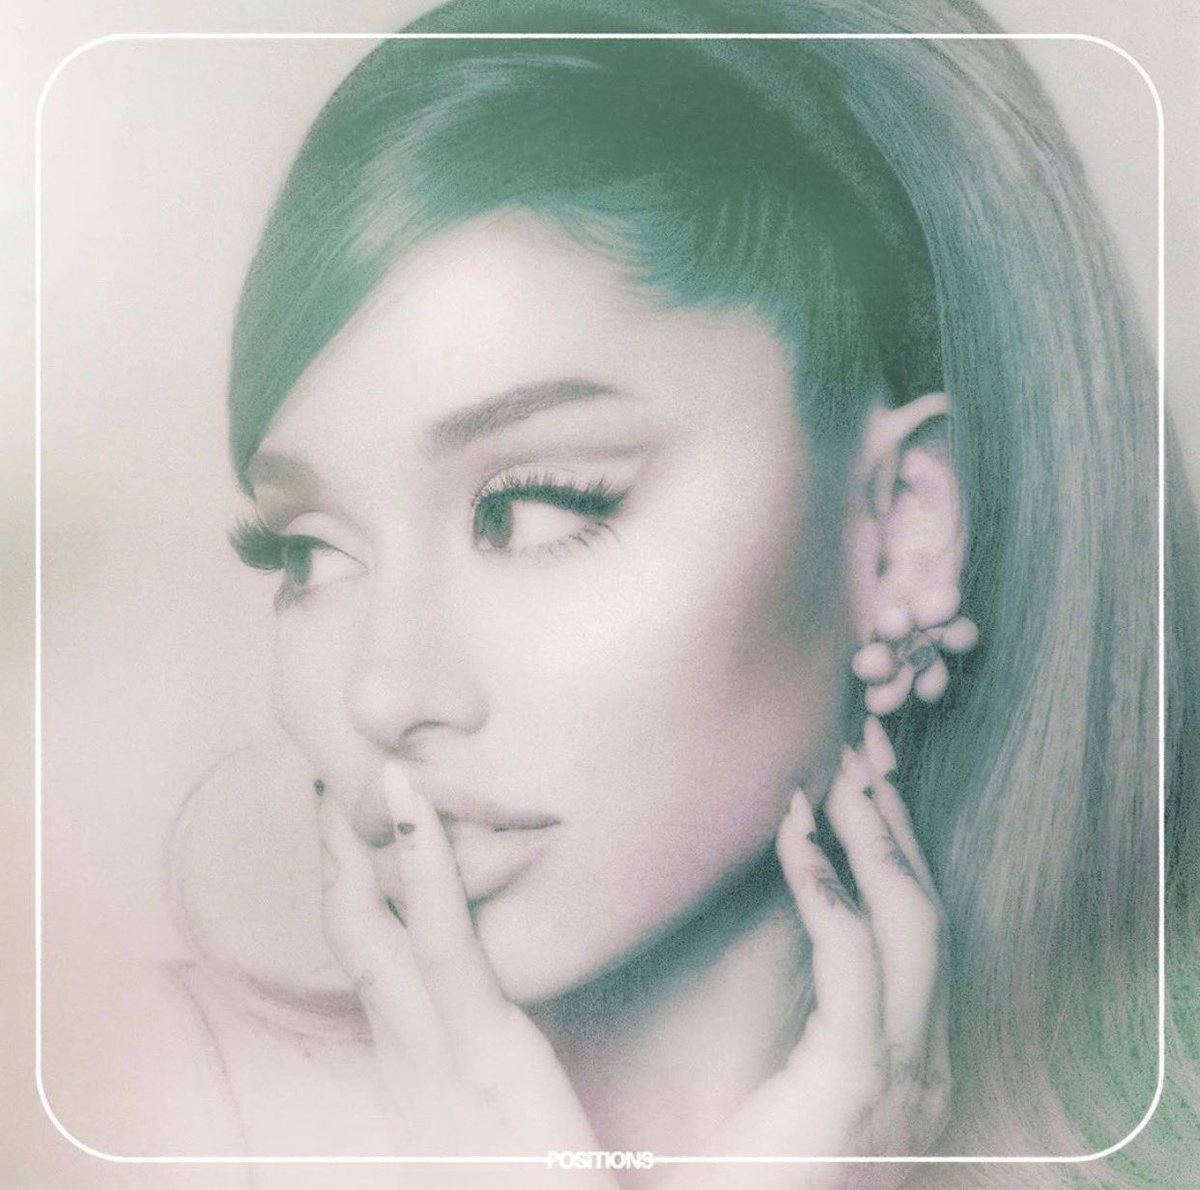 Ariana+Grand%C3%A9s+Positions+Deluxe+was+released+on+January+29.+%28Photo+credit%3A+%40ArianaGrande+via+Twitter%29